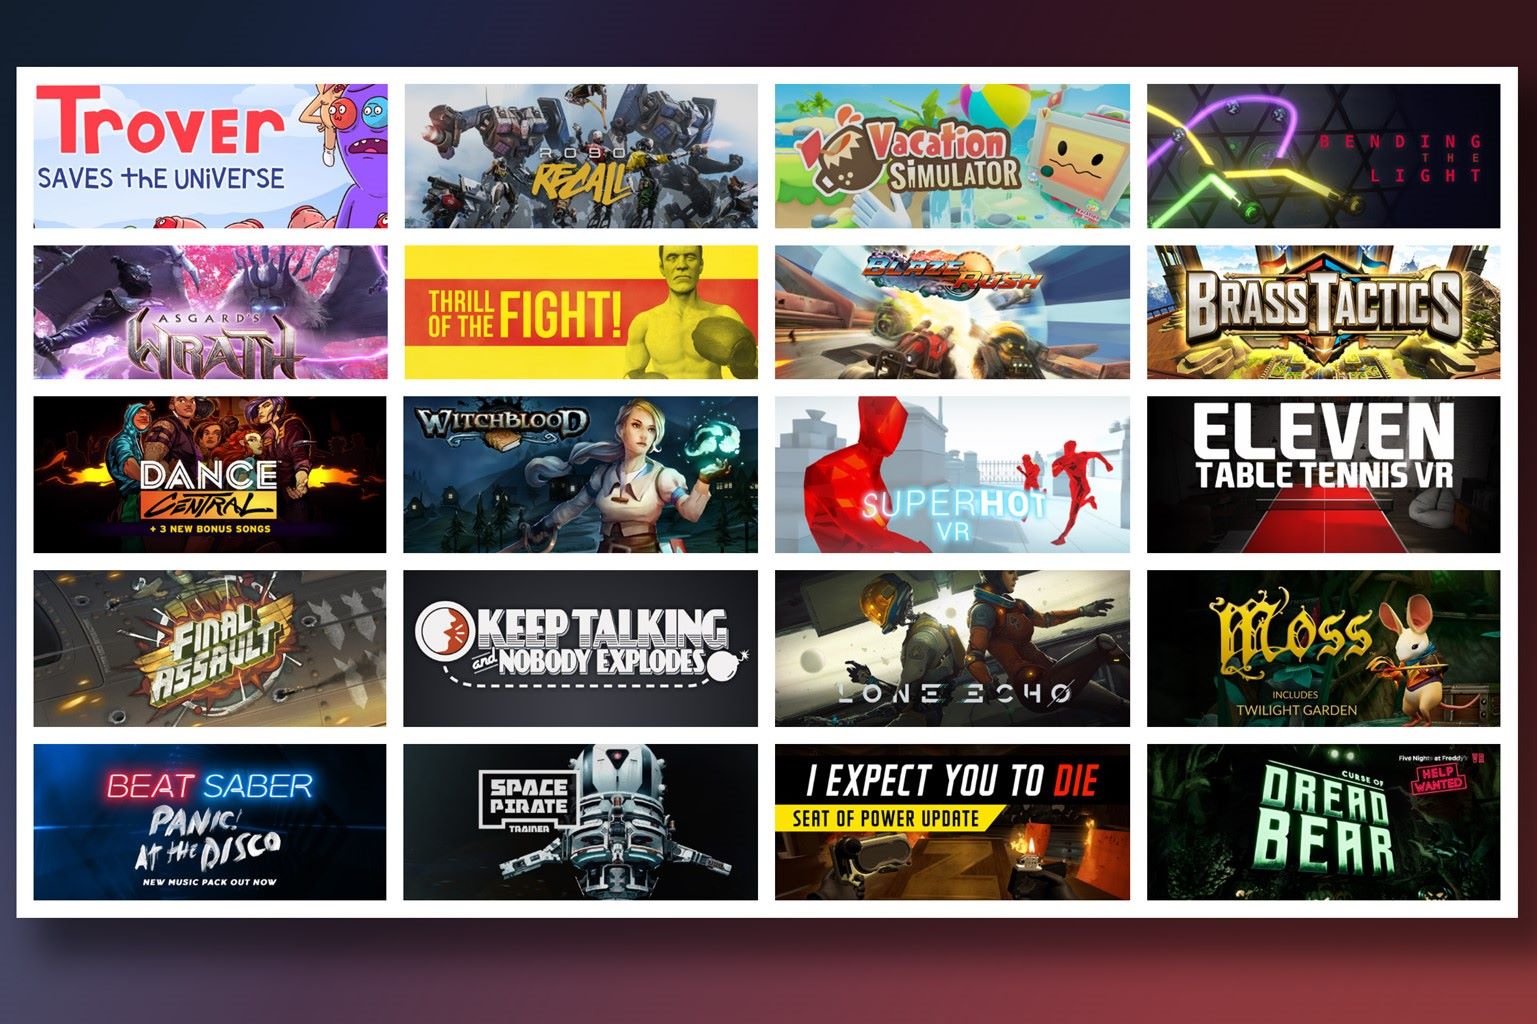 where-else-can-i-get-oculus-rift-games-besides-the-oculus-store